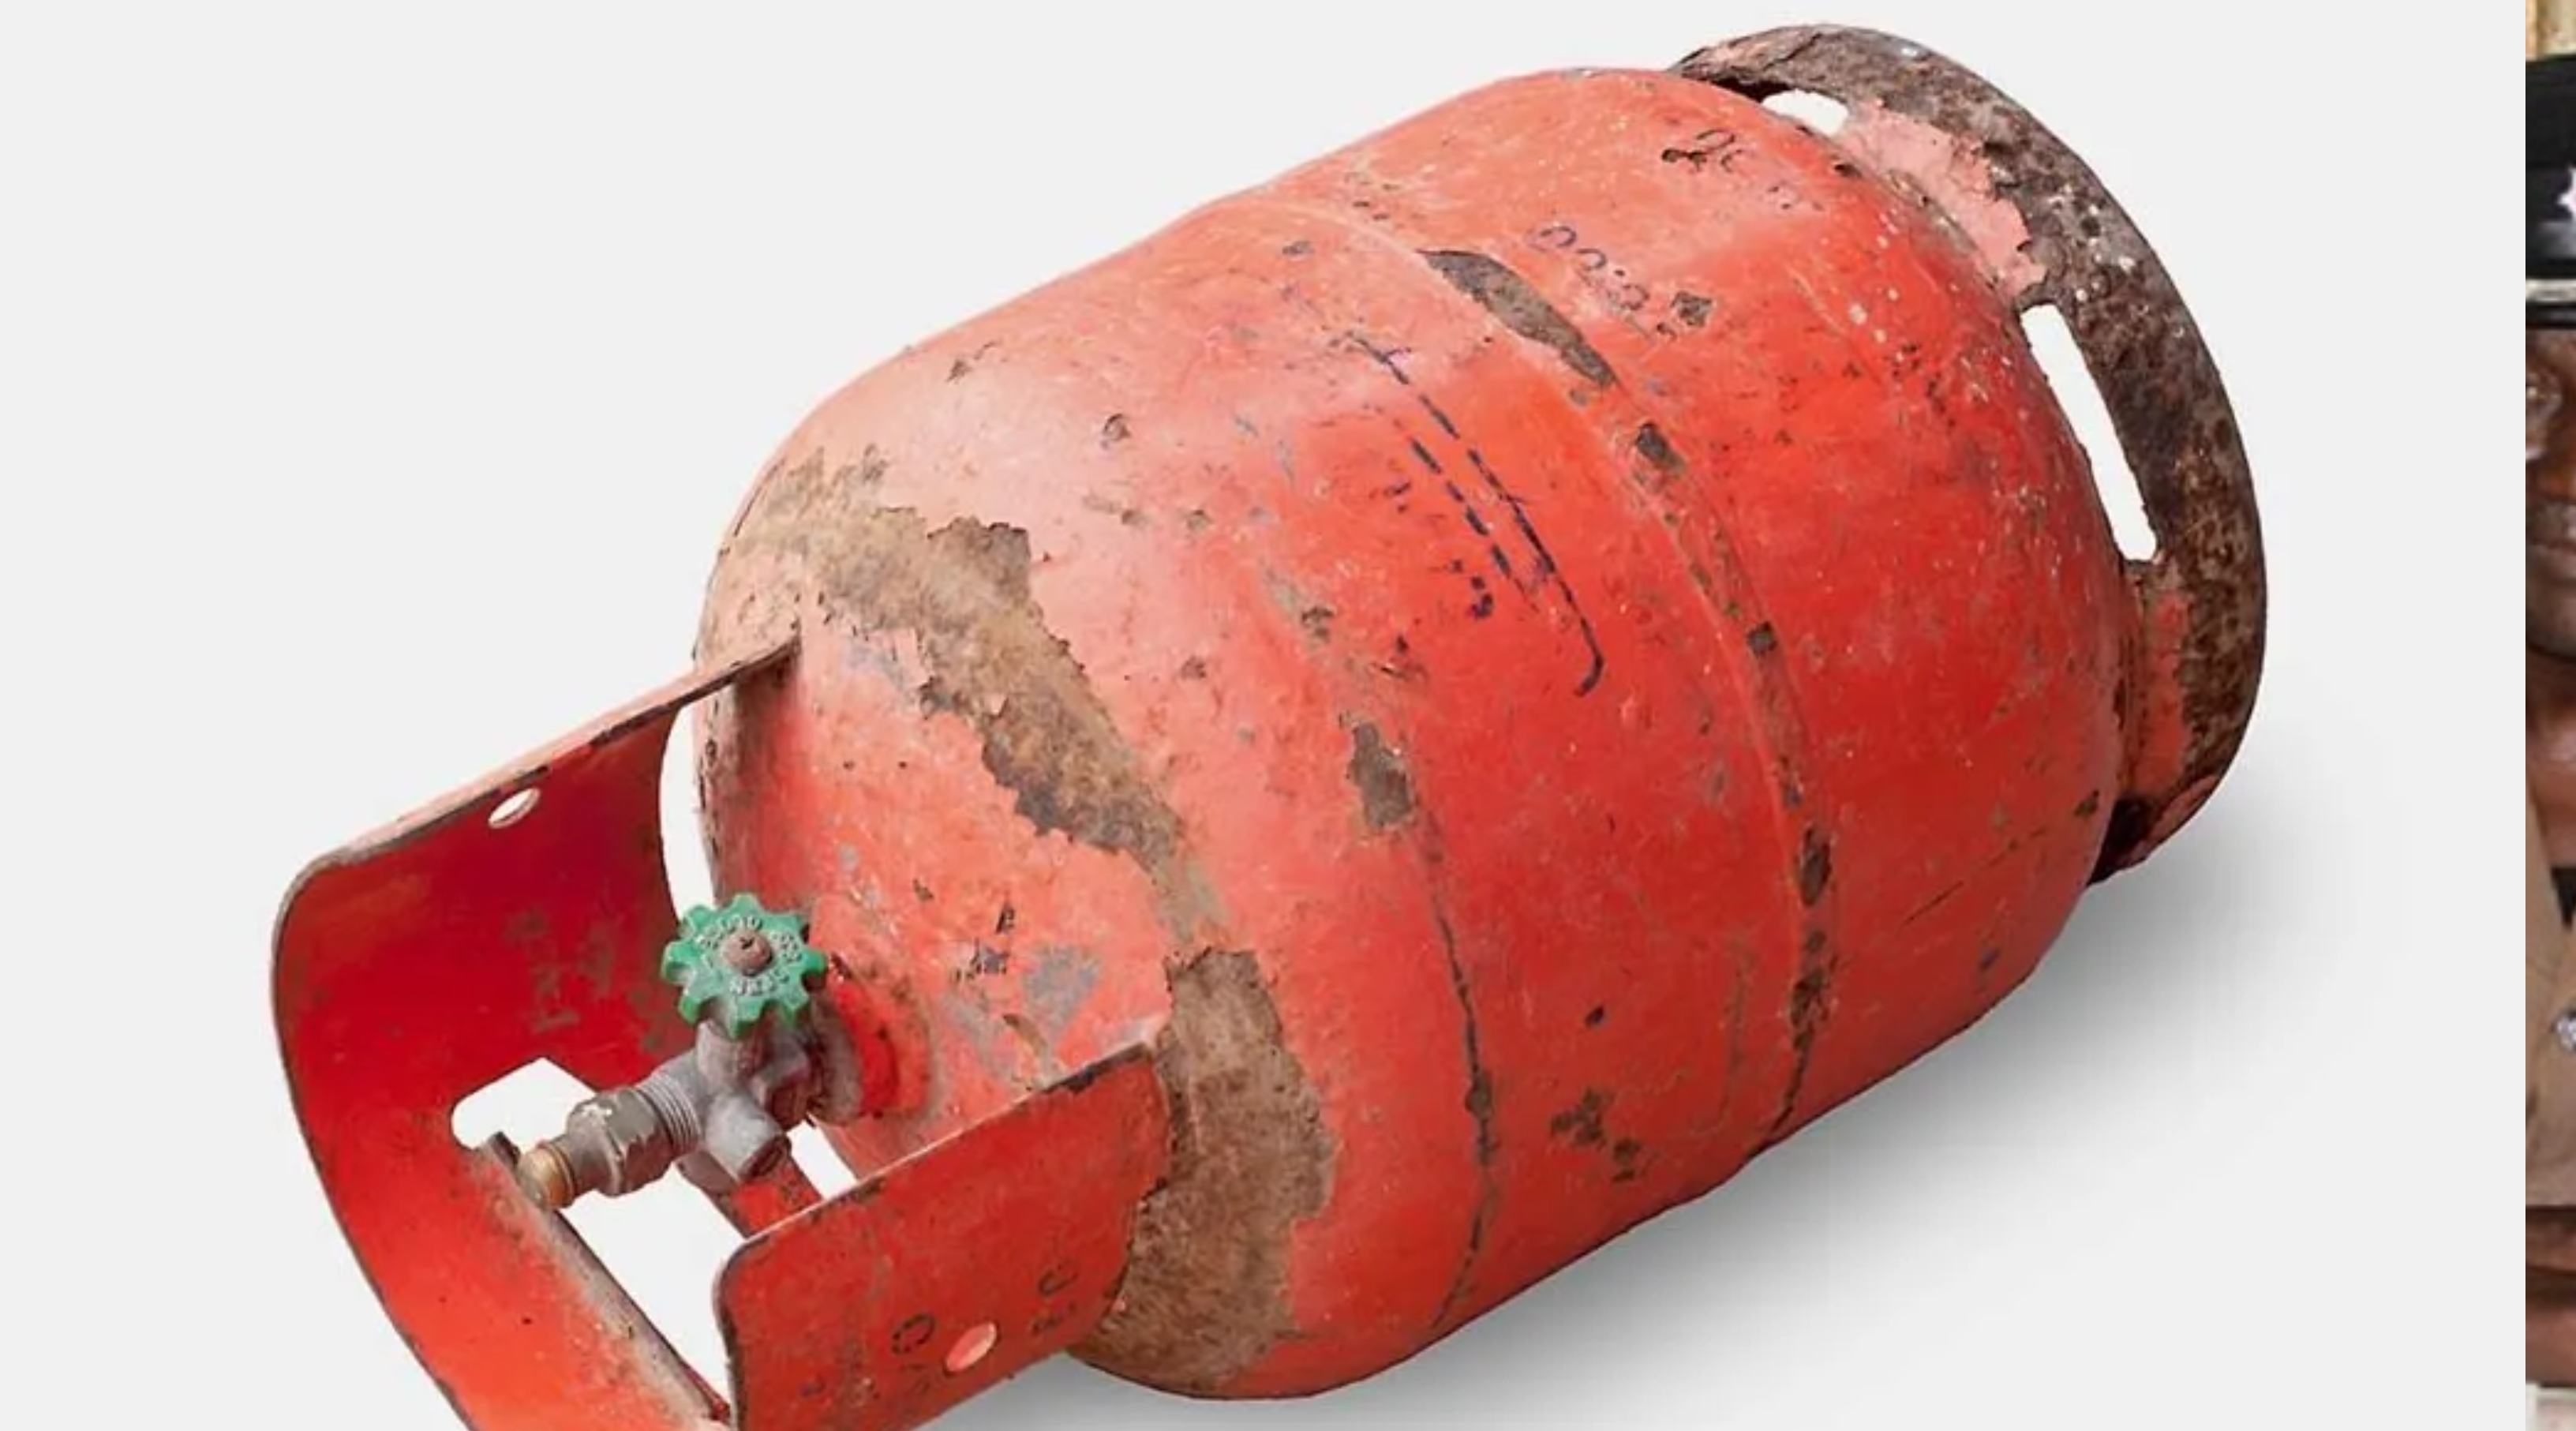 Damaged but repaired gas cylinders can kill you; stop buying - Fire Service warns